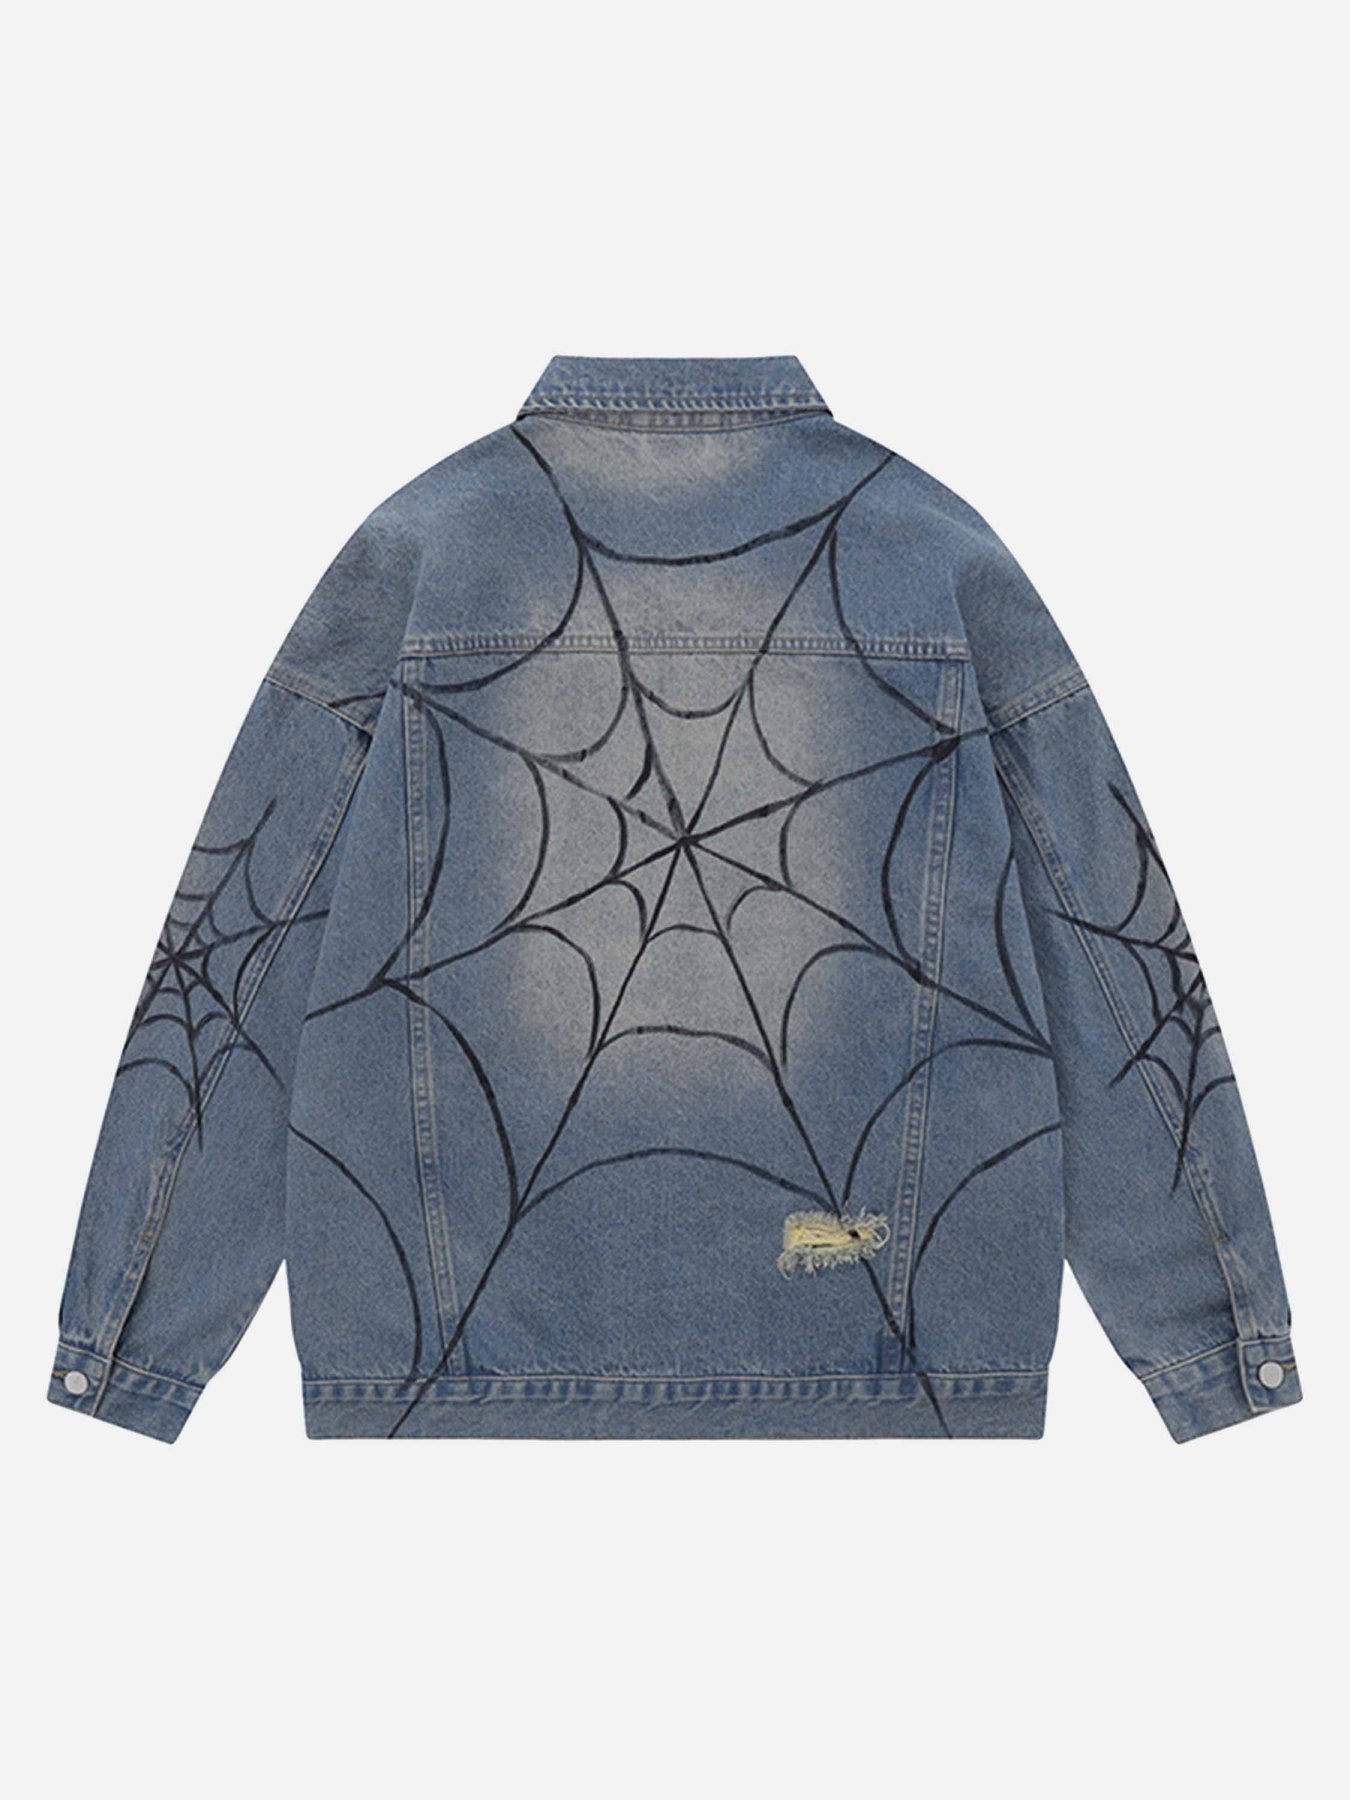 The Supermade Hand Painted Spider Denim Jacket